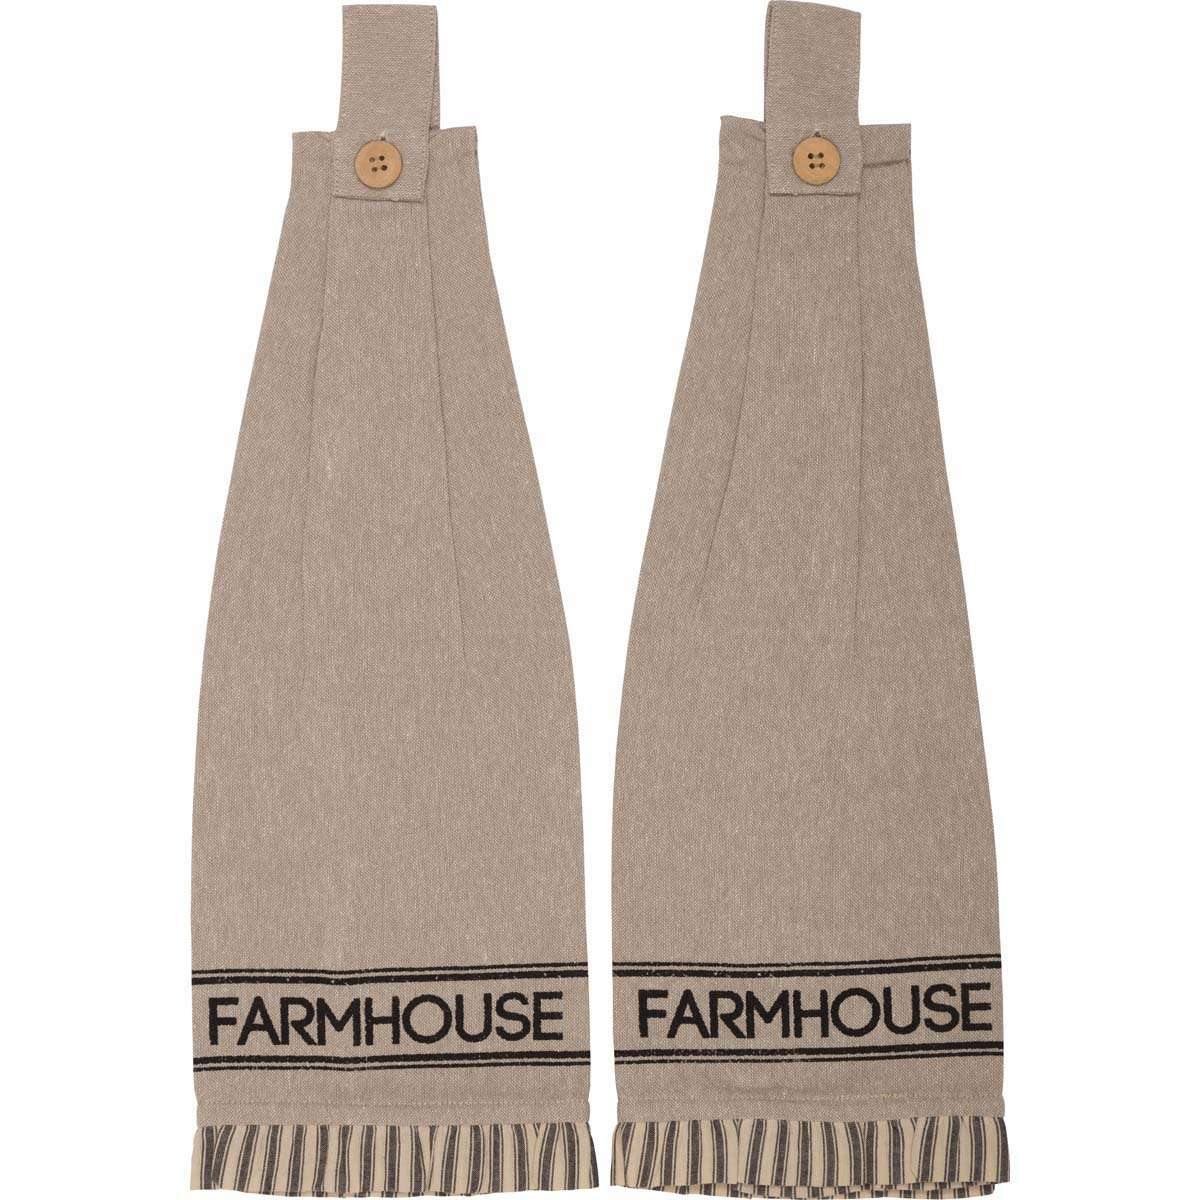 Sawyer Mill Charcoal Farmhouse Button Loop Kitchen Towel Set of 2 VHC Brands - The Fox Decor